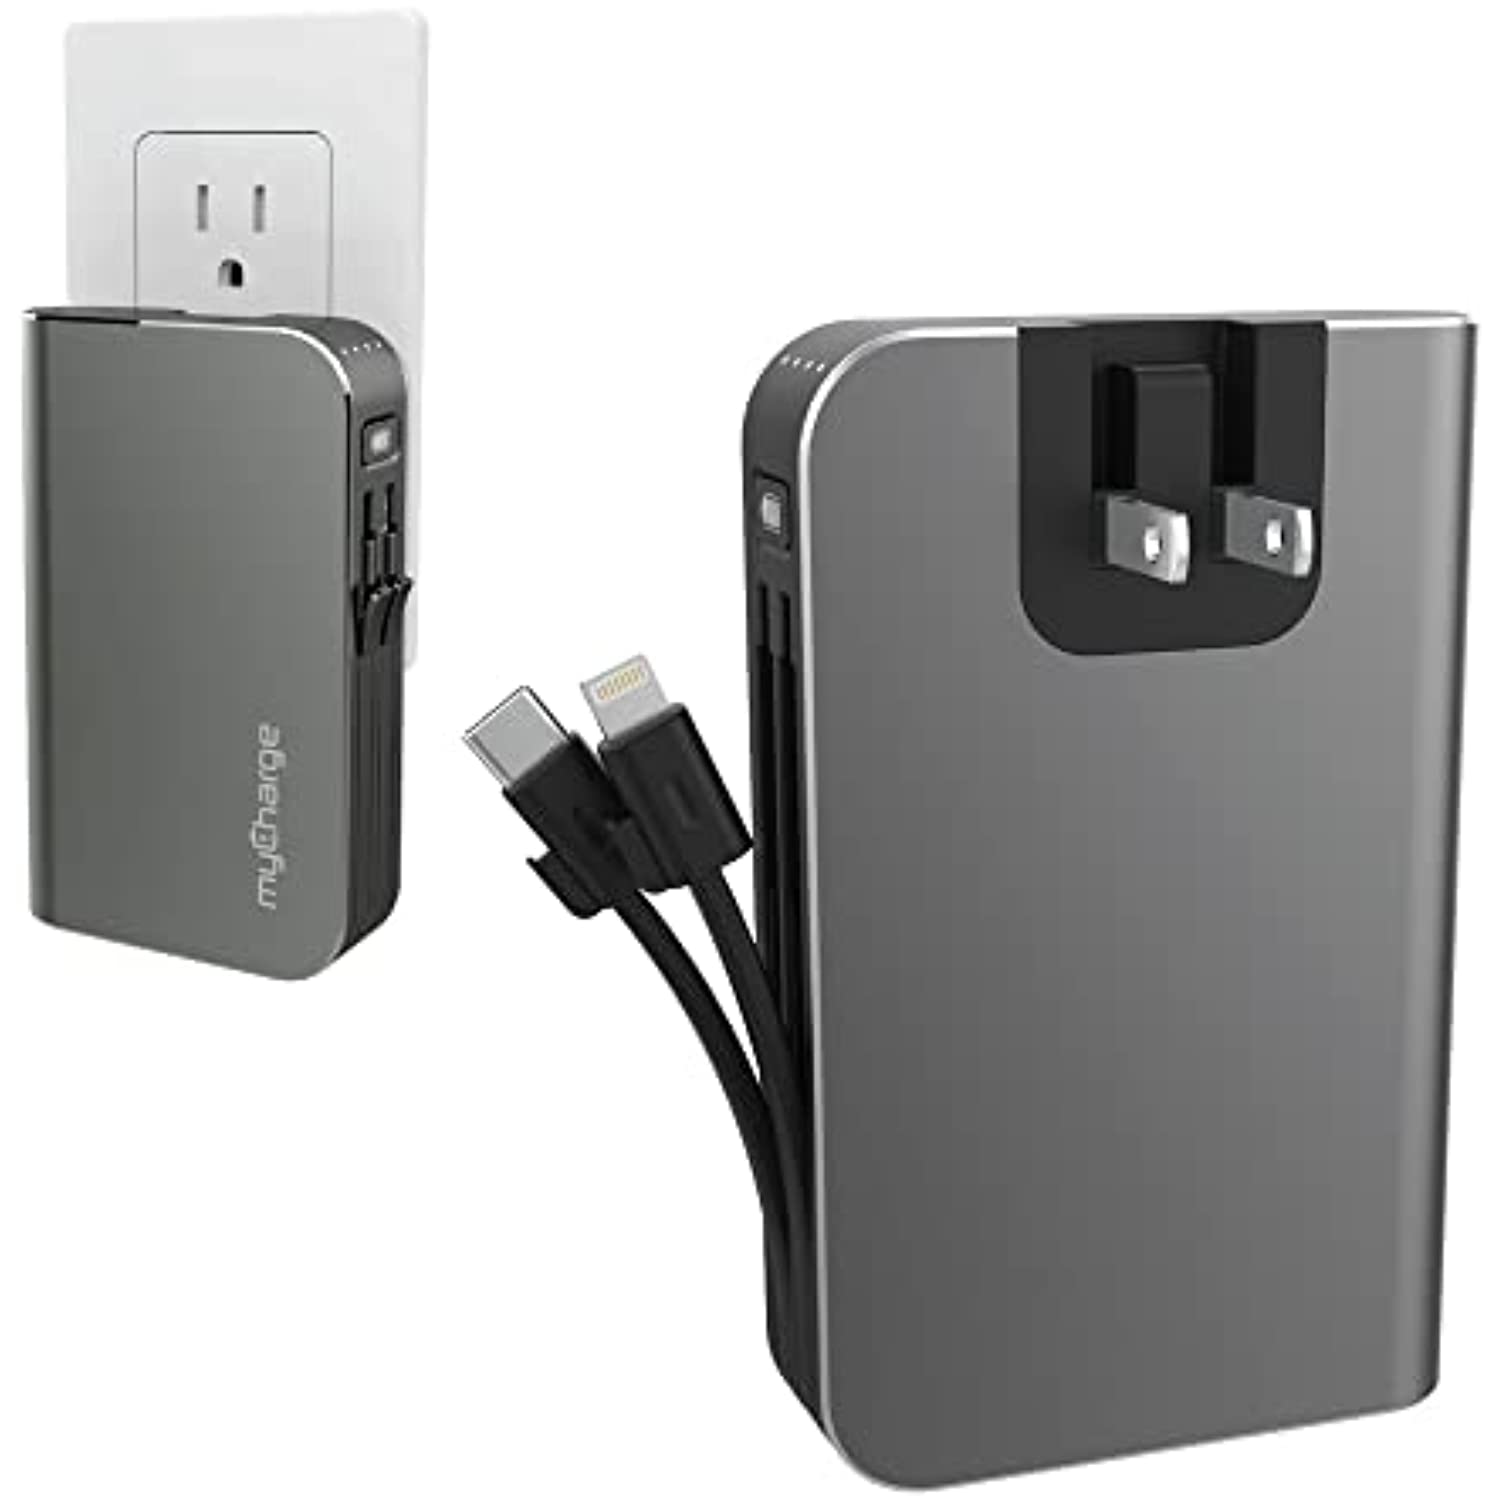 myCharge - HBT67G HUB Turbo 6700 mAh Portable Charger for Most Mobile Devices - Gray